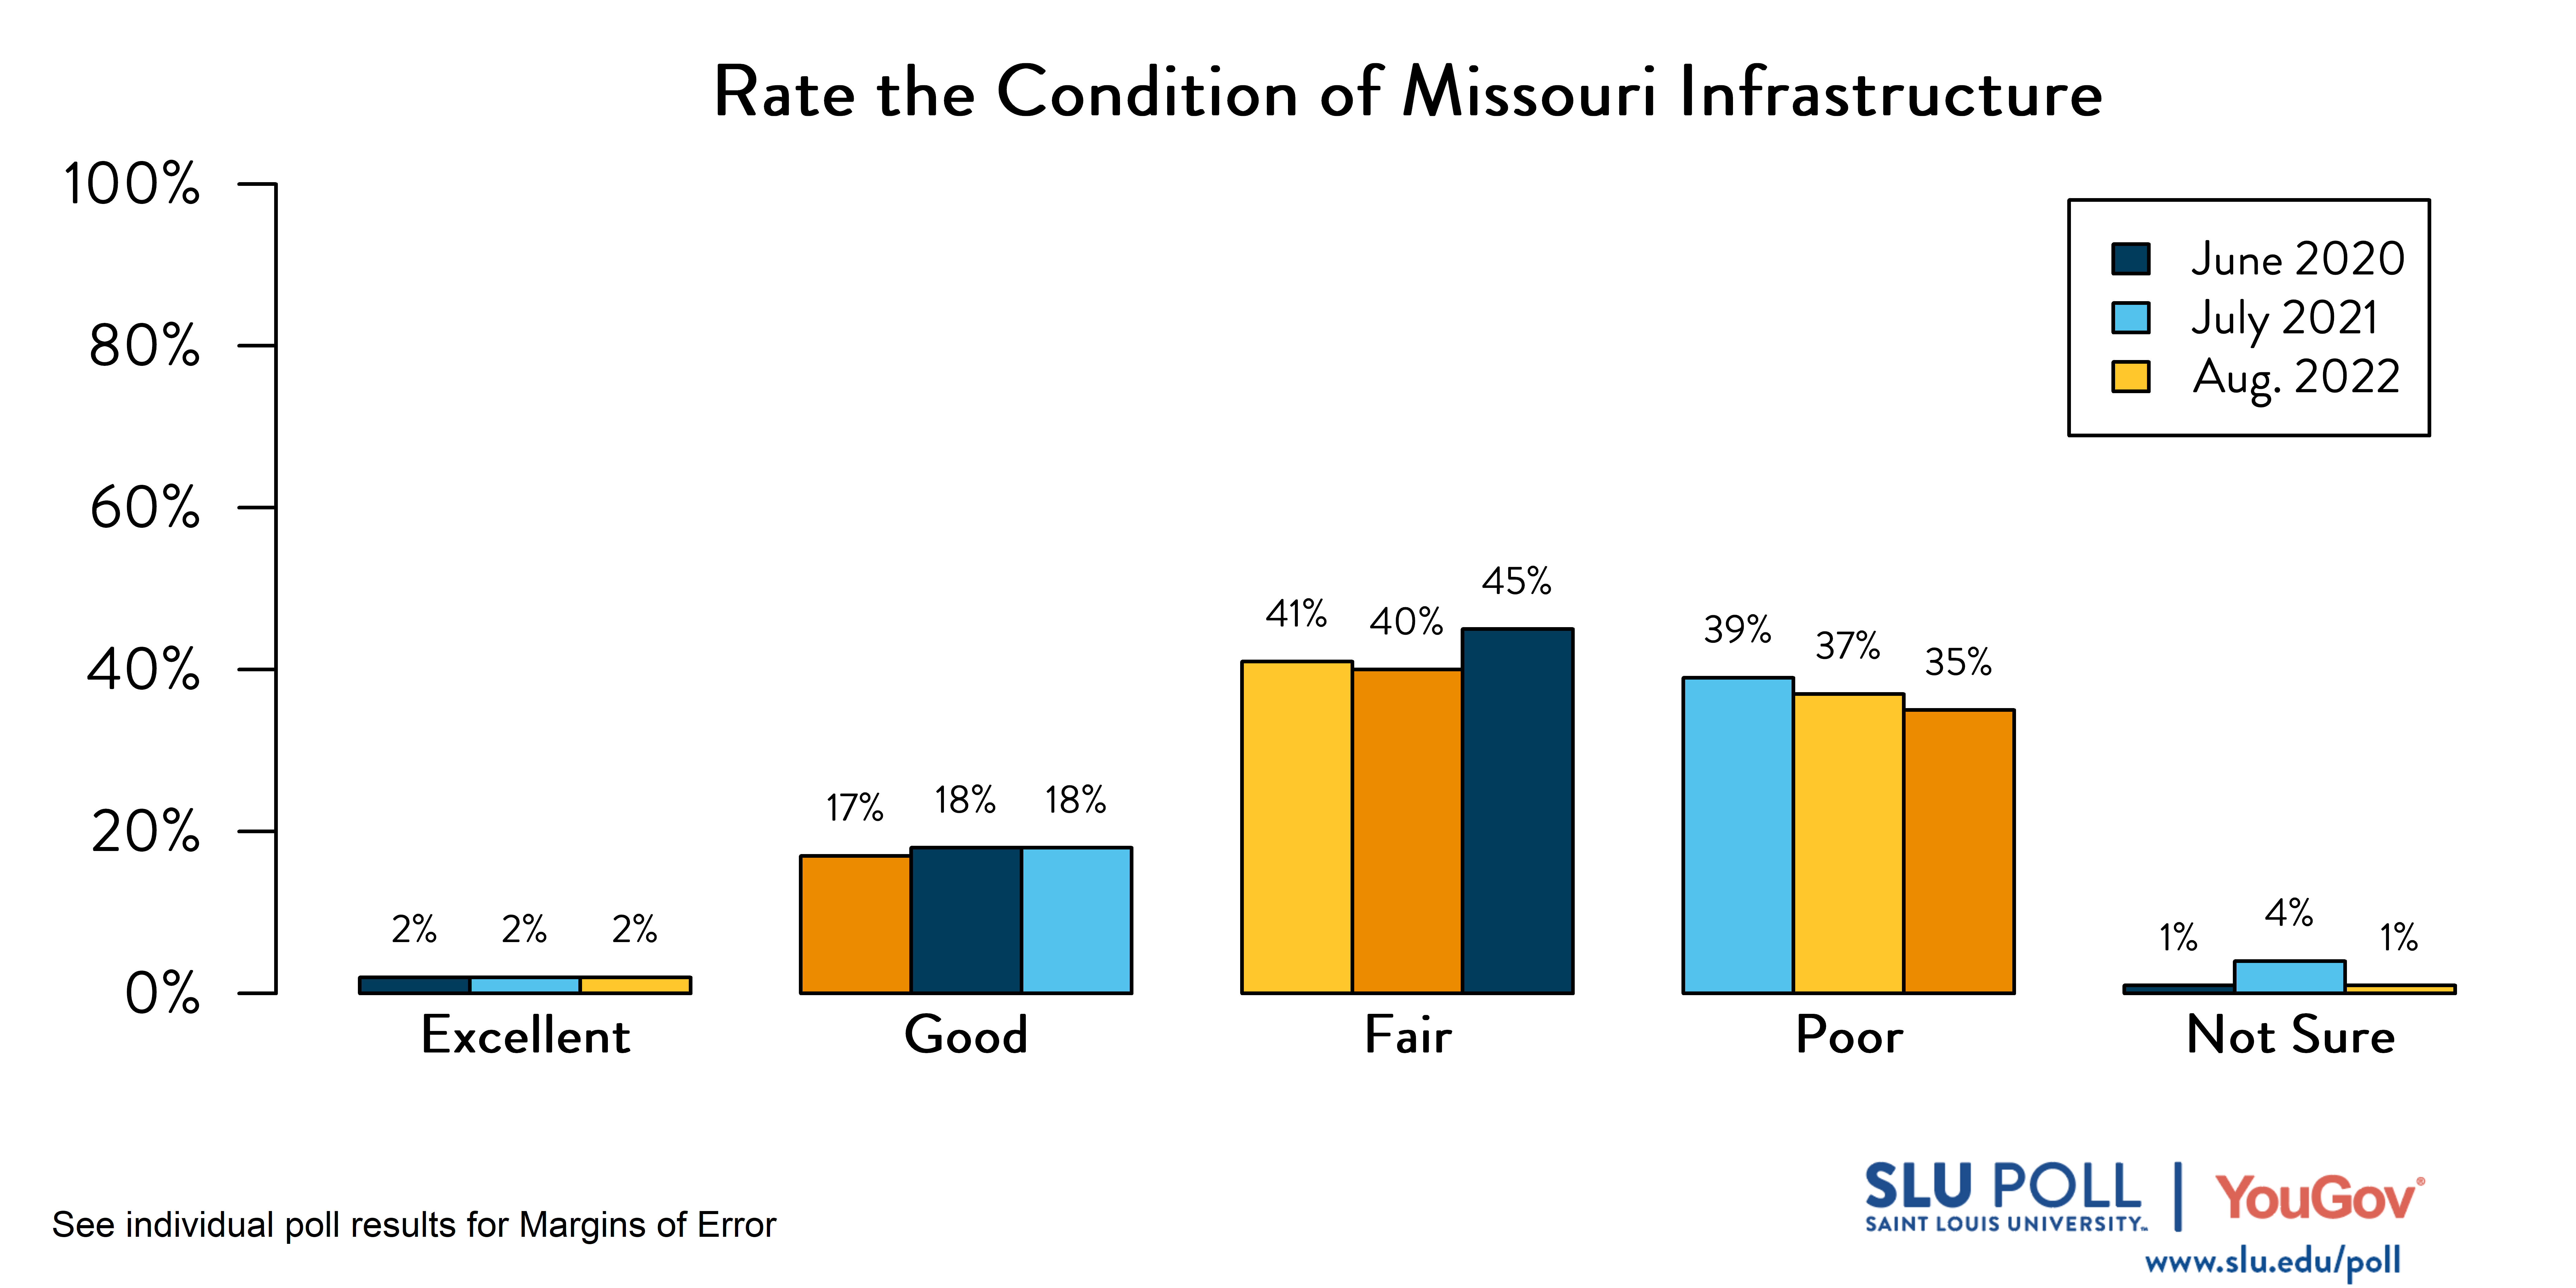 Likely voters' responses to 'How would you rate the following: Roads and infrastructure in the State of Missouri?': August 2022 Responses: 2% Excellent, 18% Good, 45% Fair, 35% Poor, and 1% Not sure. July 2021 Responses: 2% Excellent, 18% Good, 40% Fair, 37% Poor, and 4% Not sure. June 2020 Responses: 2% Excellent, 17% Good, 41% Fair, 39% Poor, and 1% Not sure.